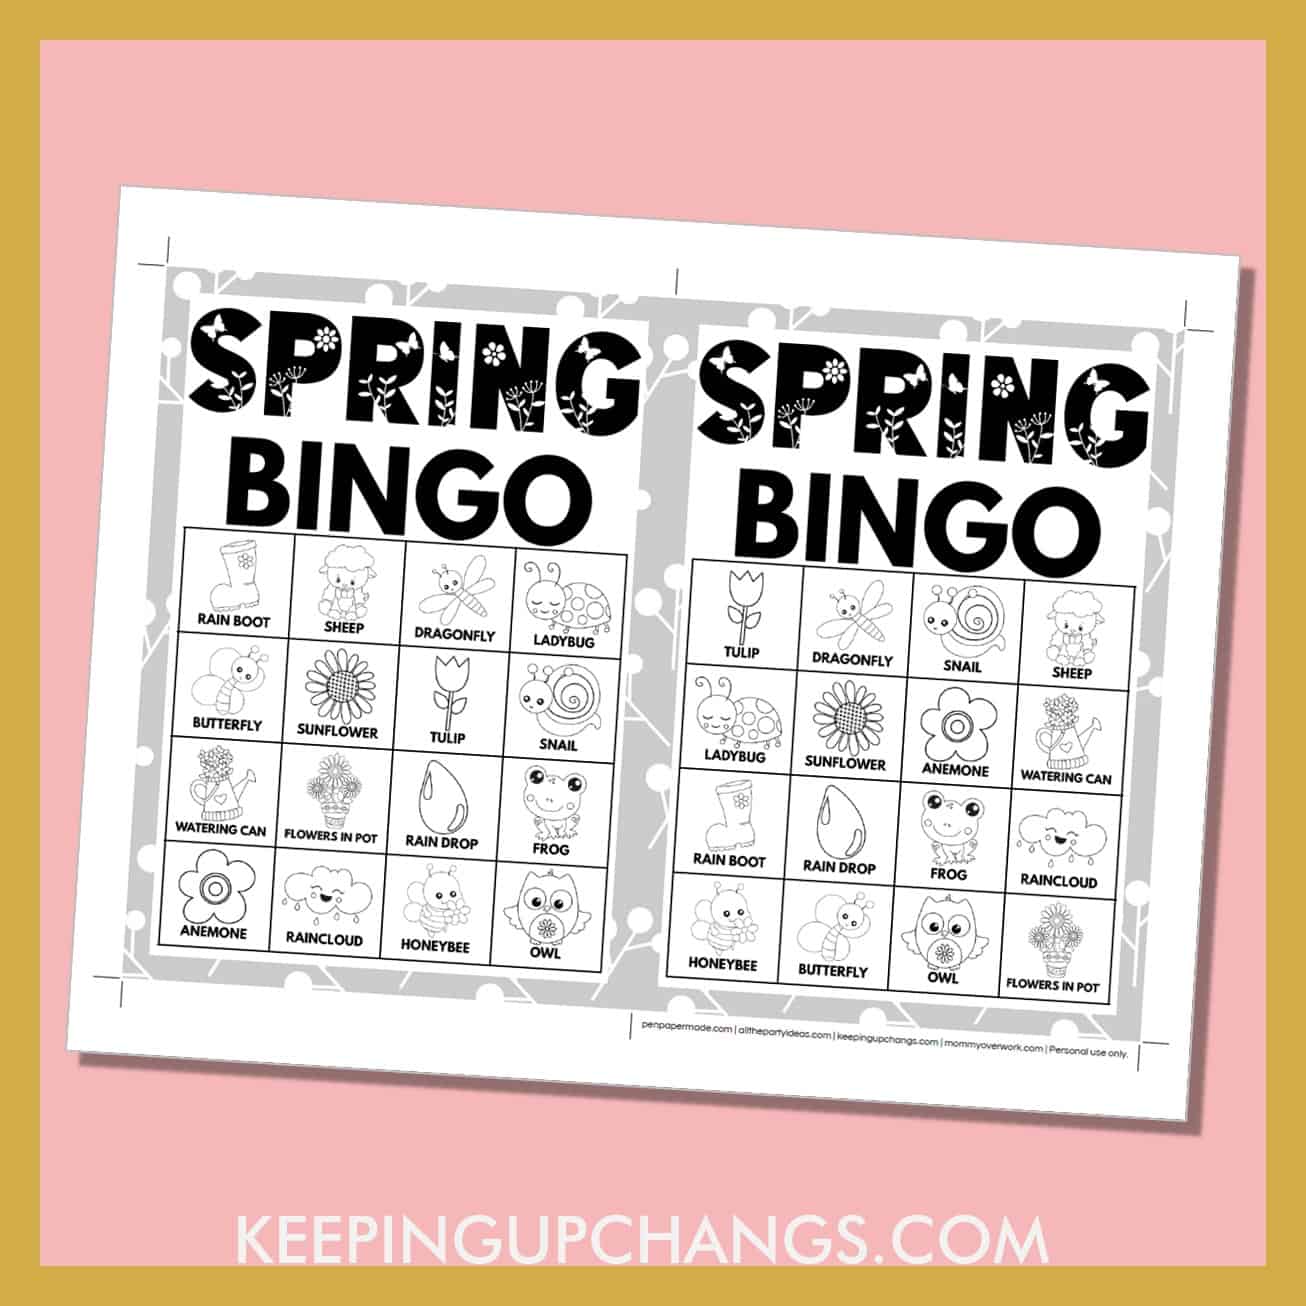 free spring bingo card 4x4 5x7 game boards with black, white images and text words.